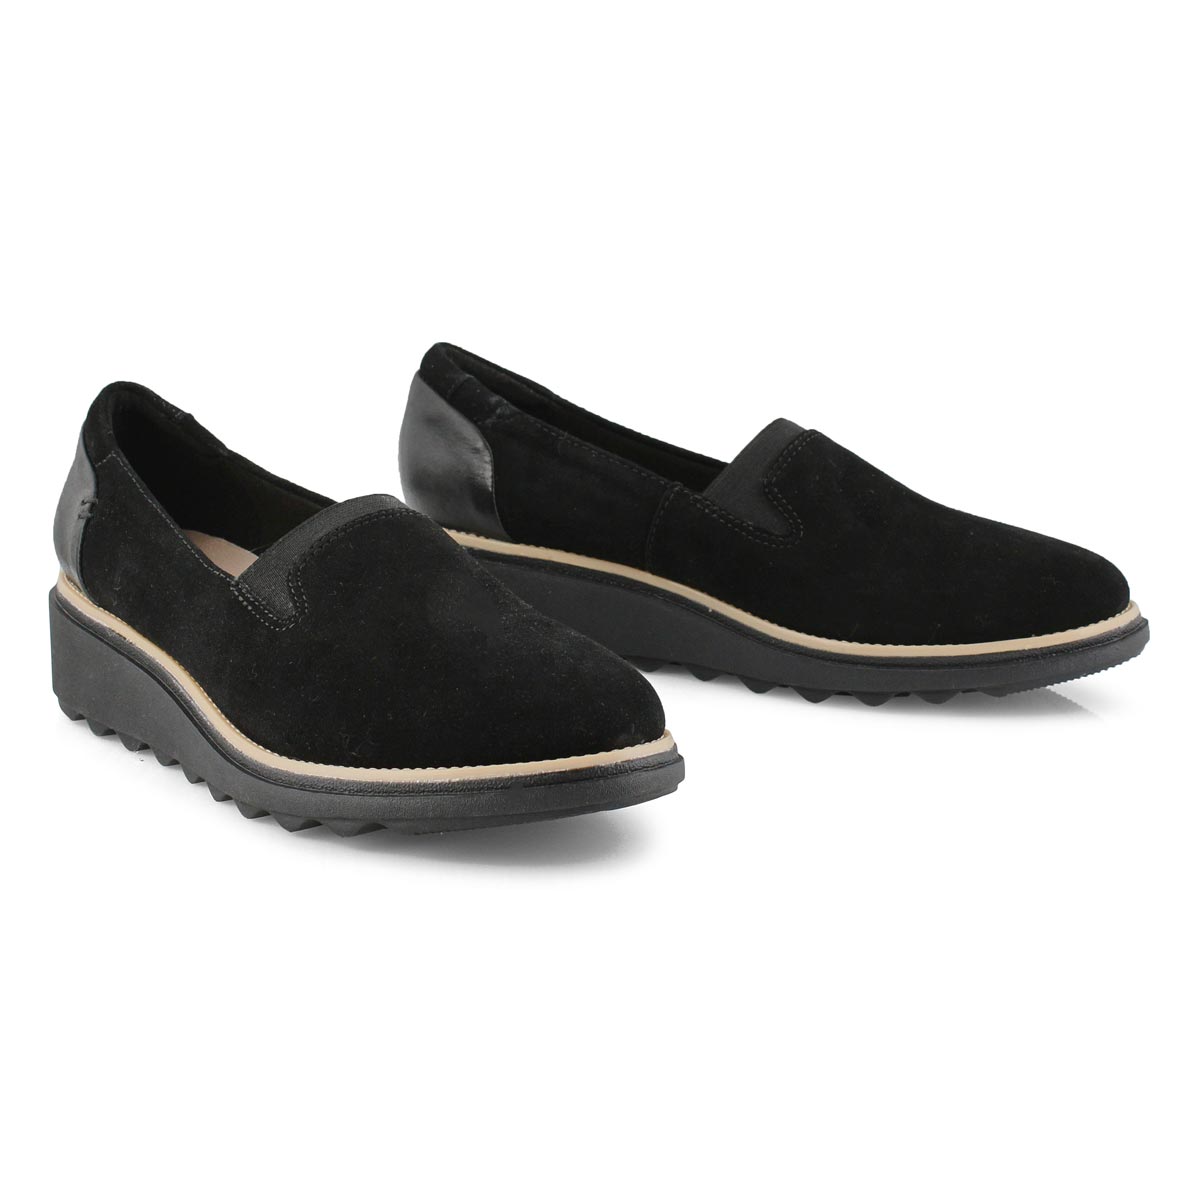 Clarks Women's Sharon Dolly Casual Loafer - B | SoftMoc.com